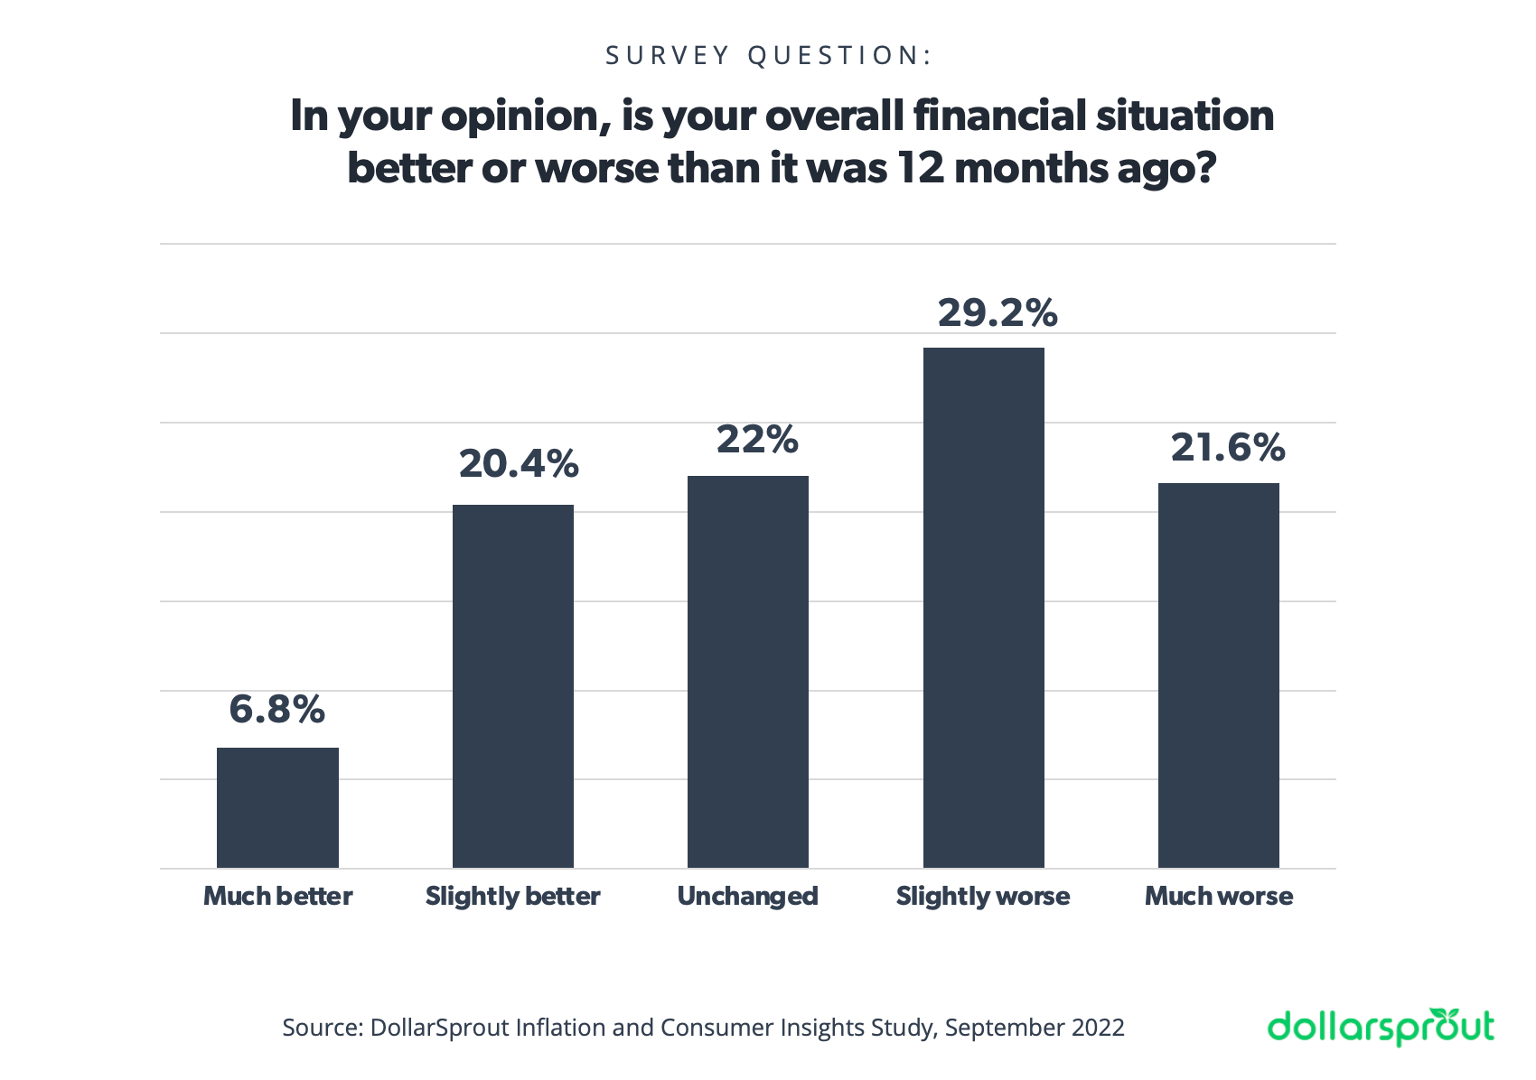 Is your overall financial situation better or worse than 12 months ago?  Only 26% said it was better.